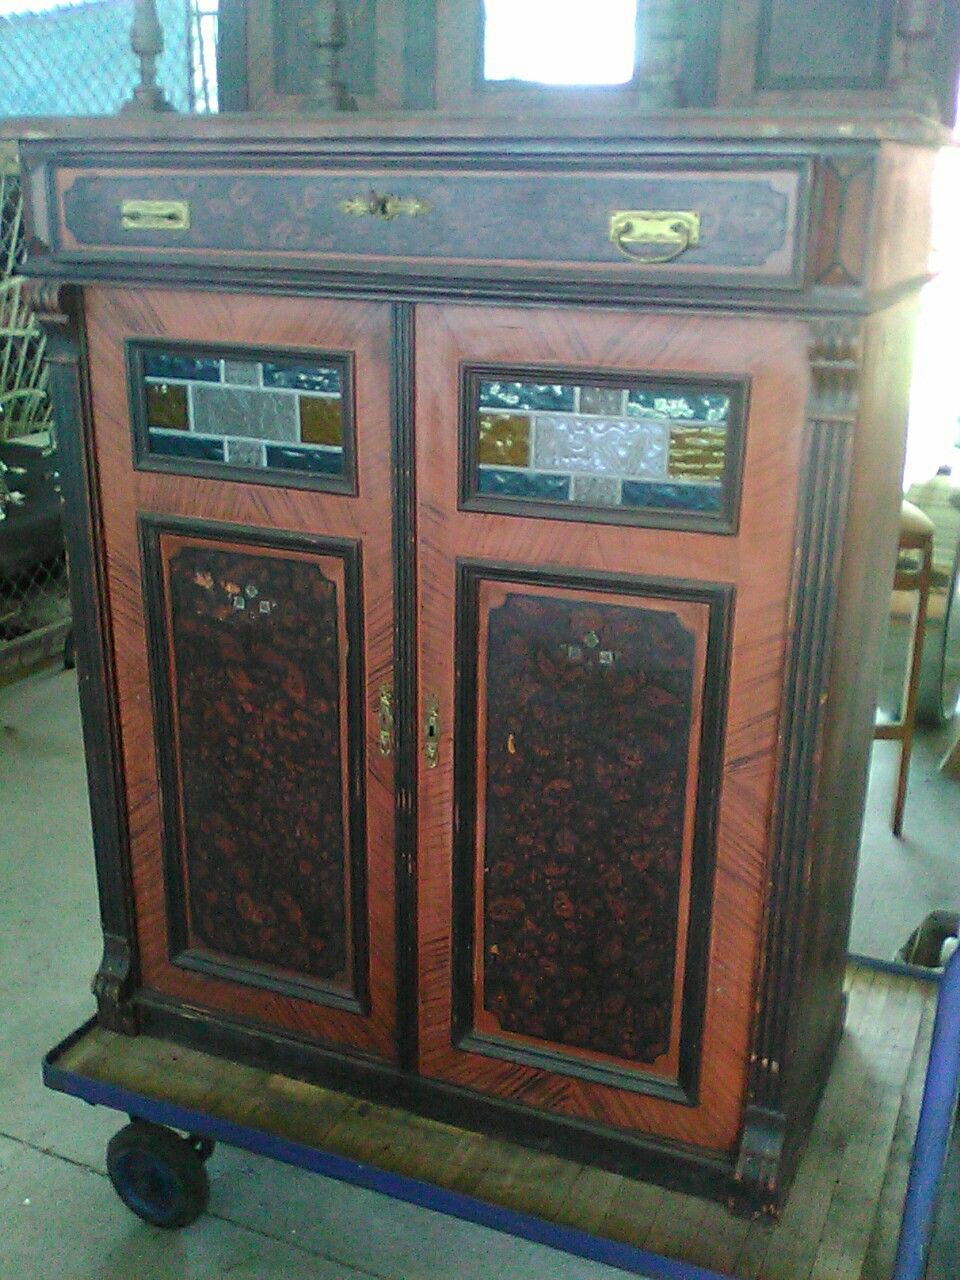 Antique furniture from Germany